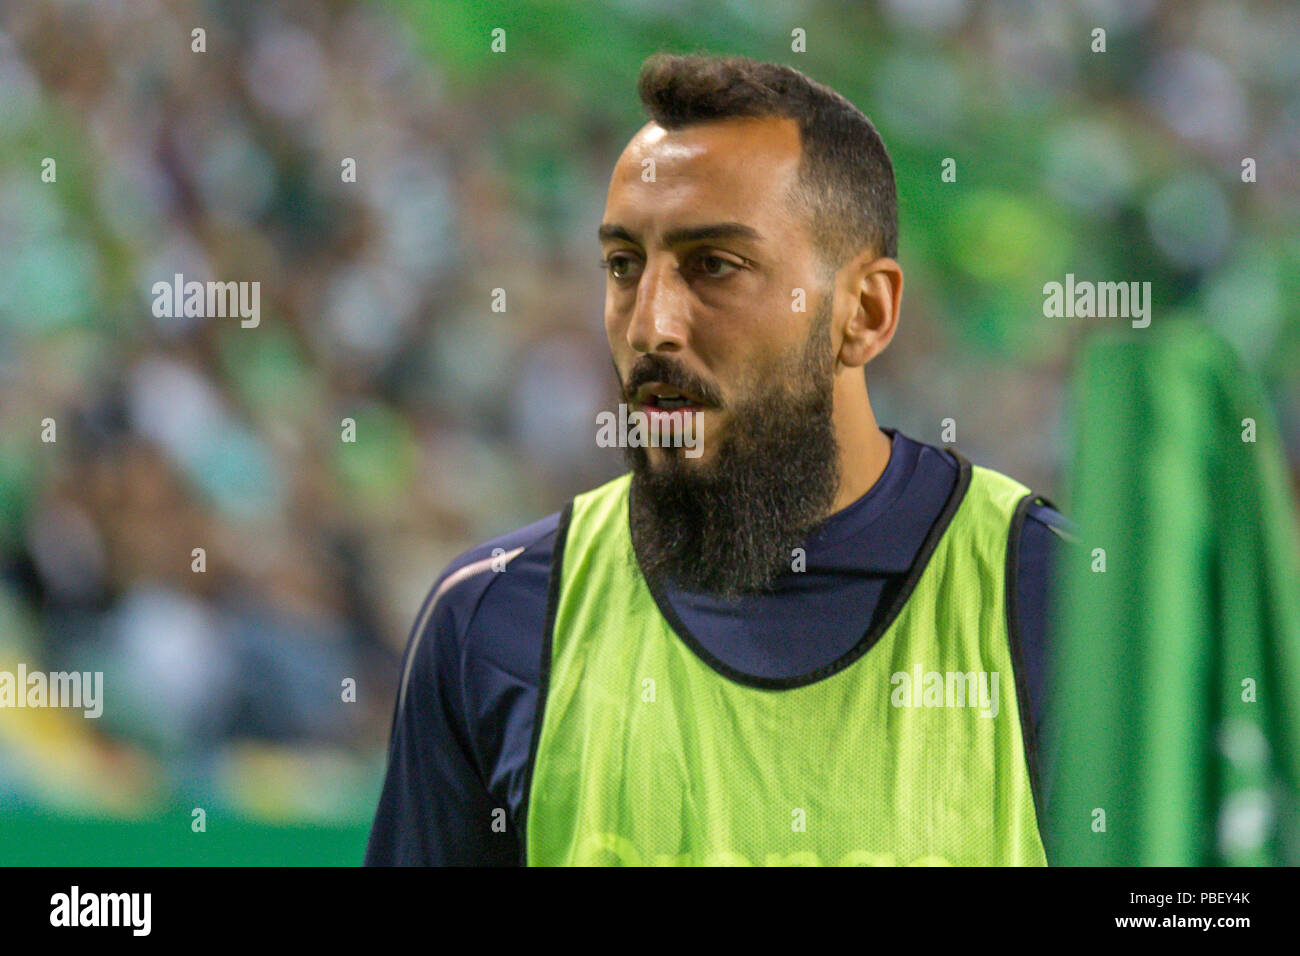 July 28, 2018. Lisbon, Portugal. Marseille's forward from Greece Kostas Mitroglou (11) in action during the game Sporting CP v Olympique de Marseille © Alexandre de Sousa/Alamy Live News Stock Photo